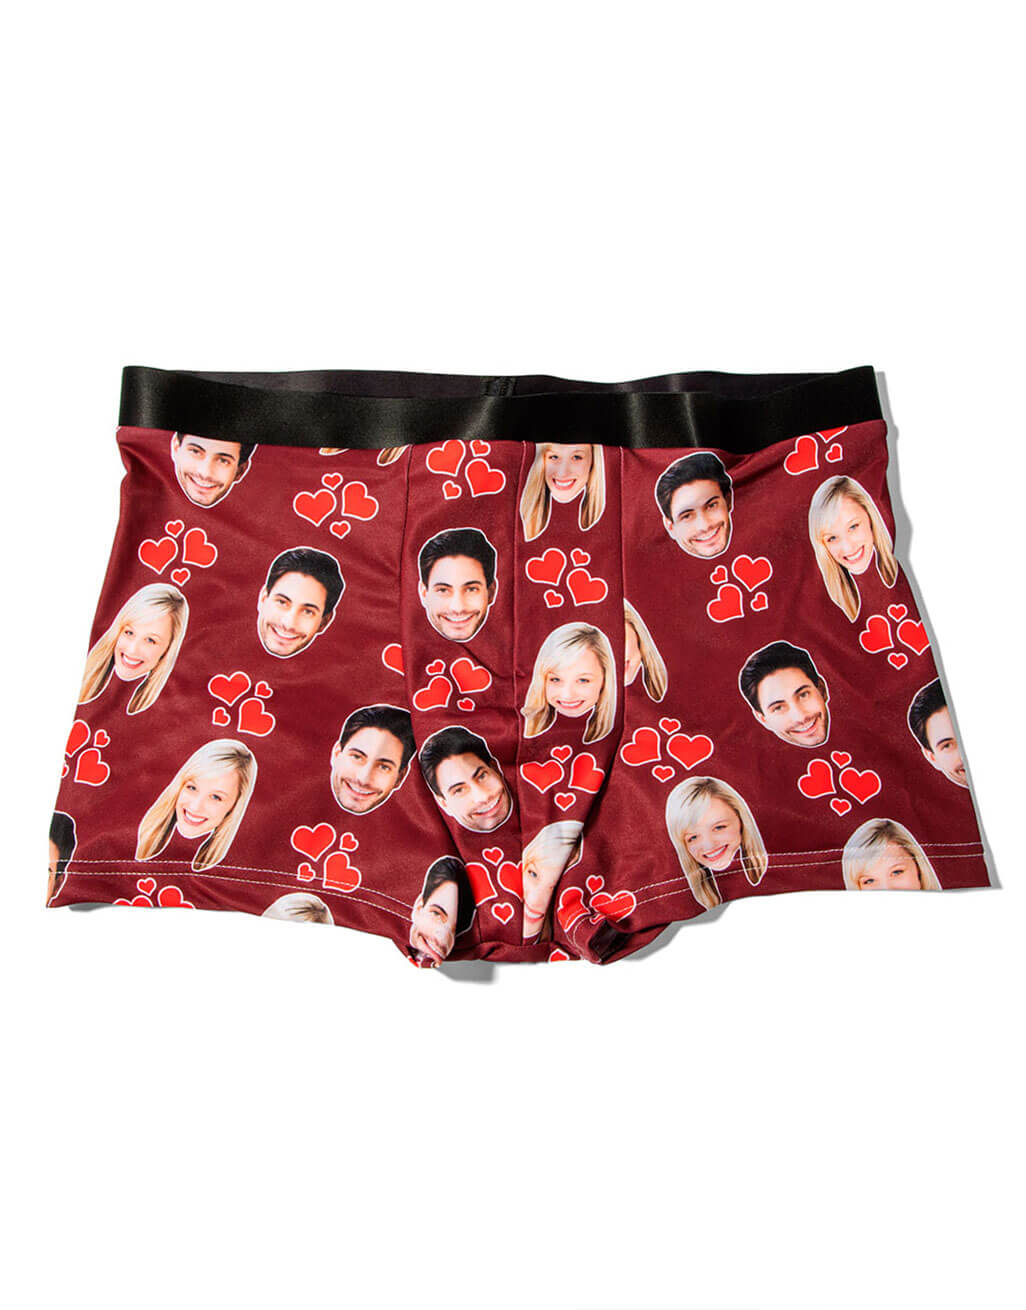 I Love My Wife Boxers Property of Boxers Funny Boxers Men's Underwear  Custom Boxers Men's Boxers Valentines Day Gift -  Canada